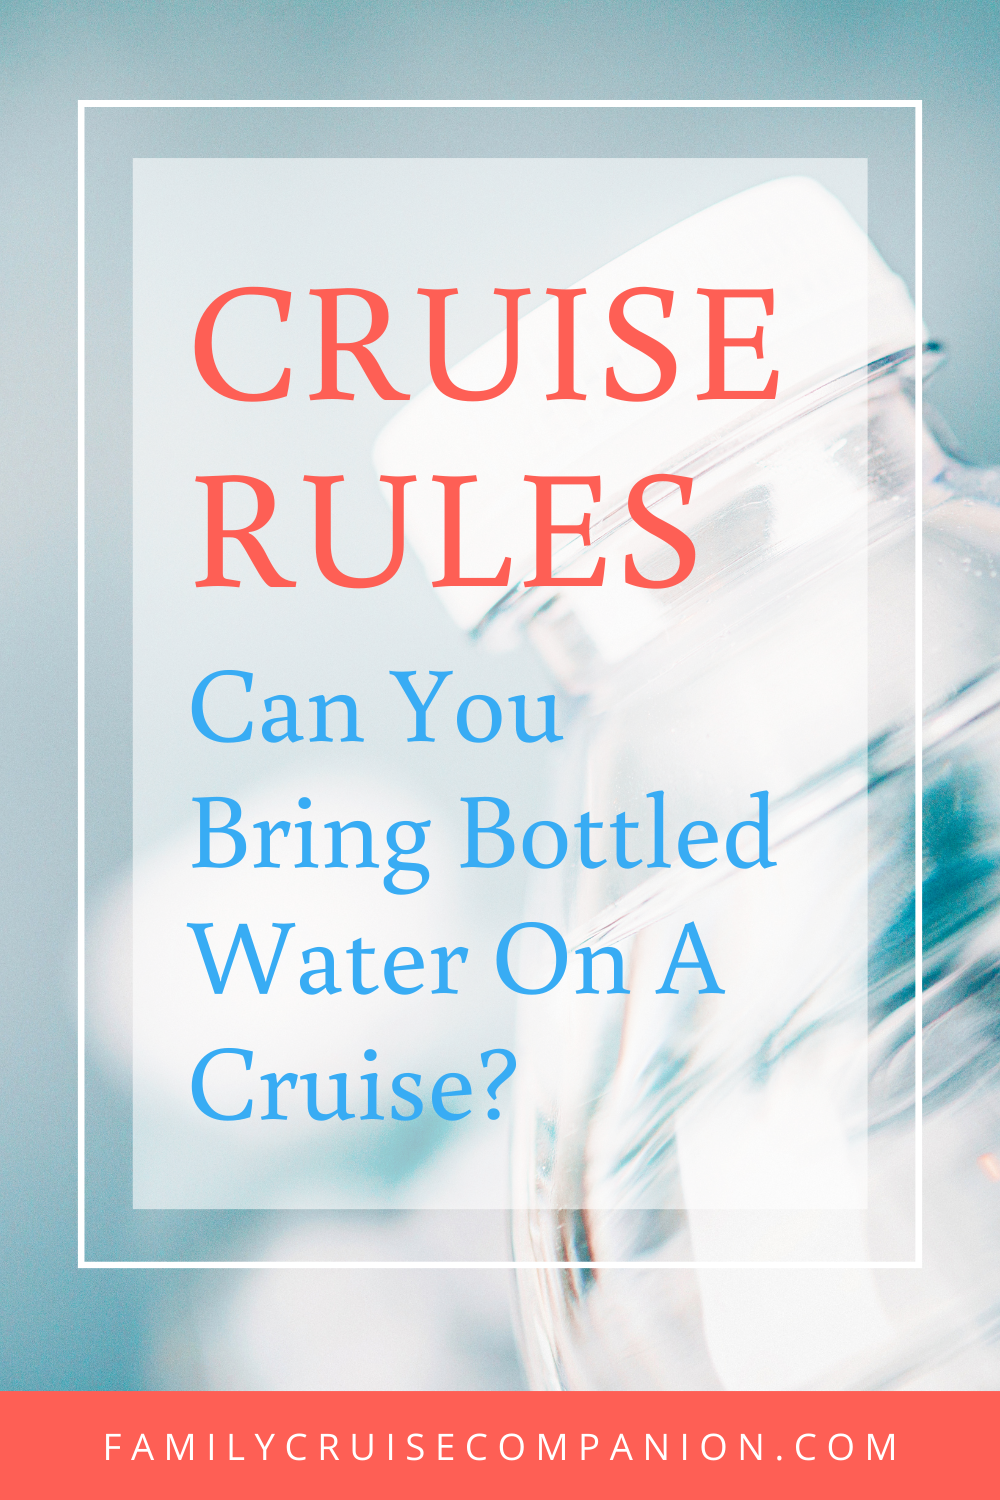 Can You Bring Bottled Water On A Cruise? Here's A Useful Guide!